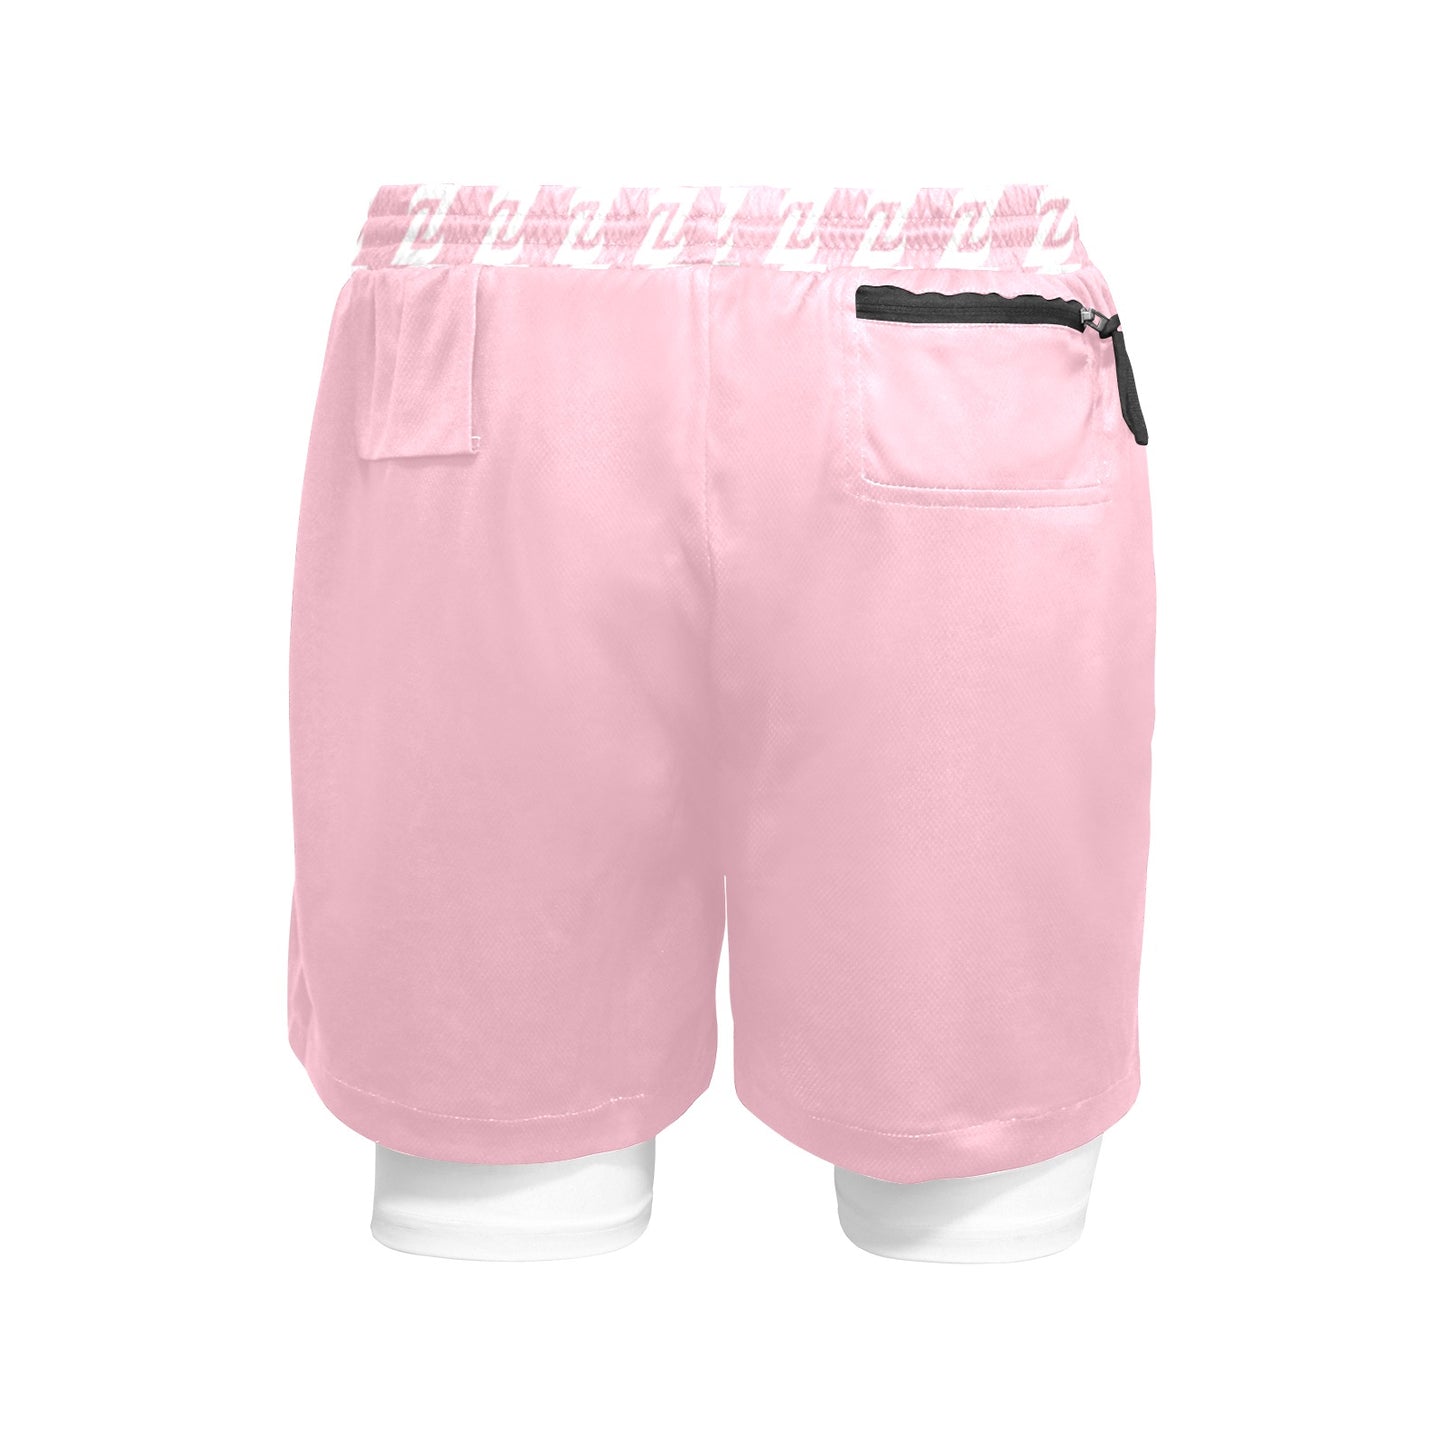 Zen Shorts with Liner - Pink